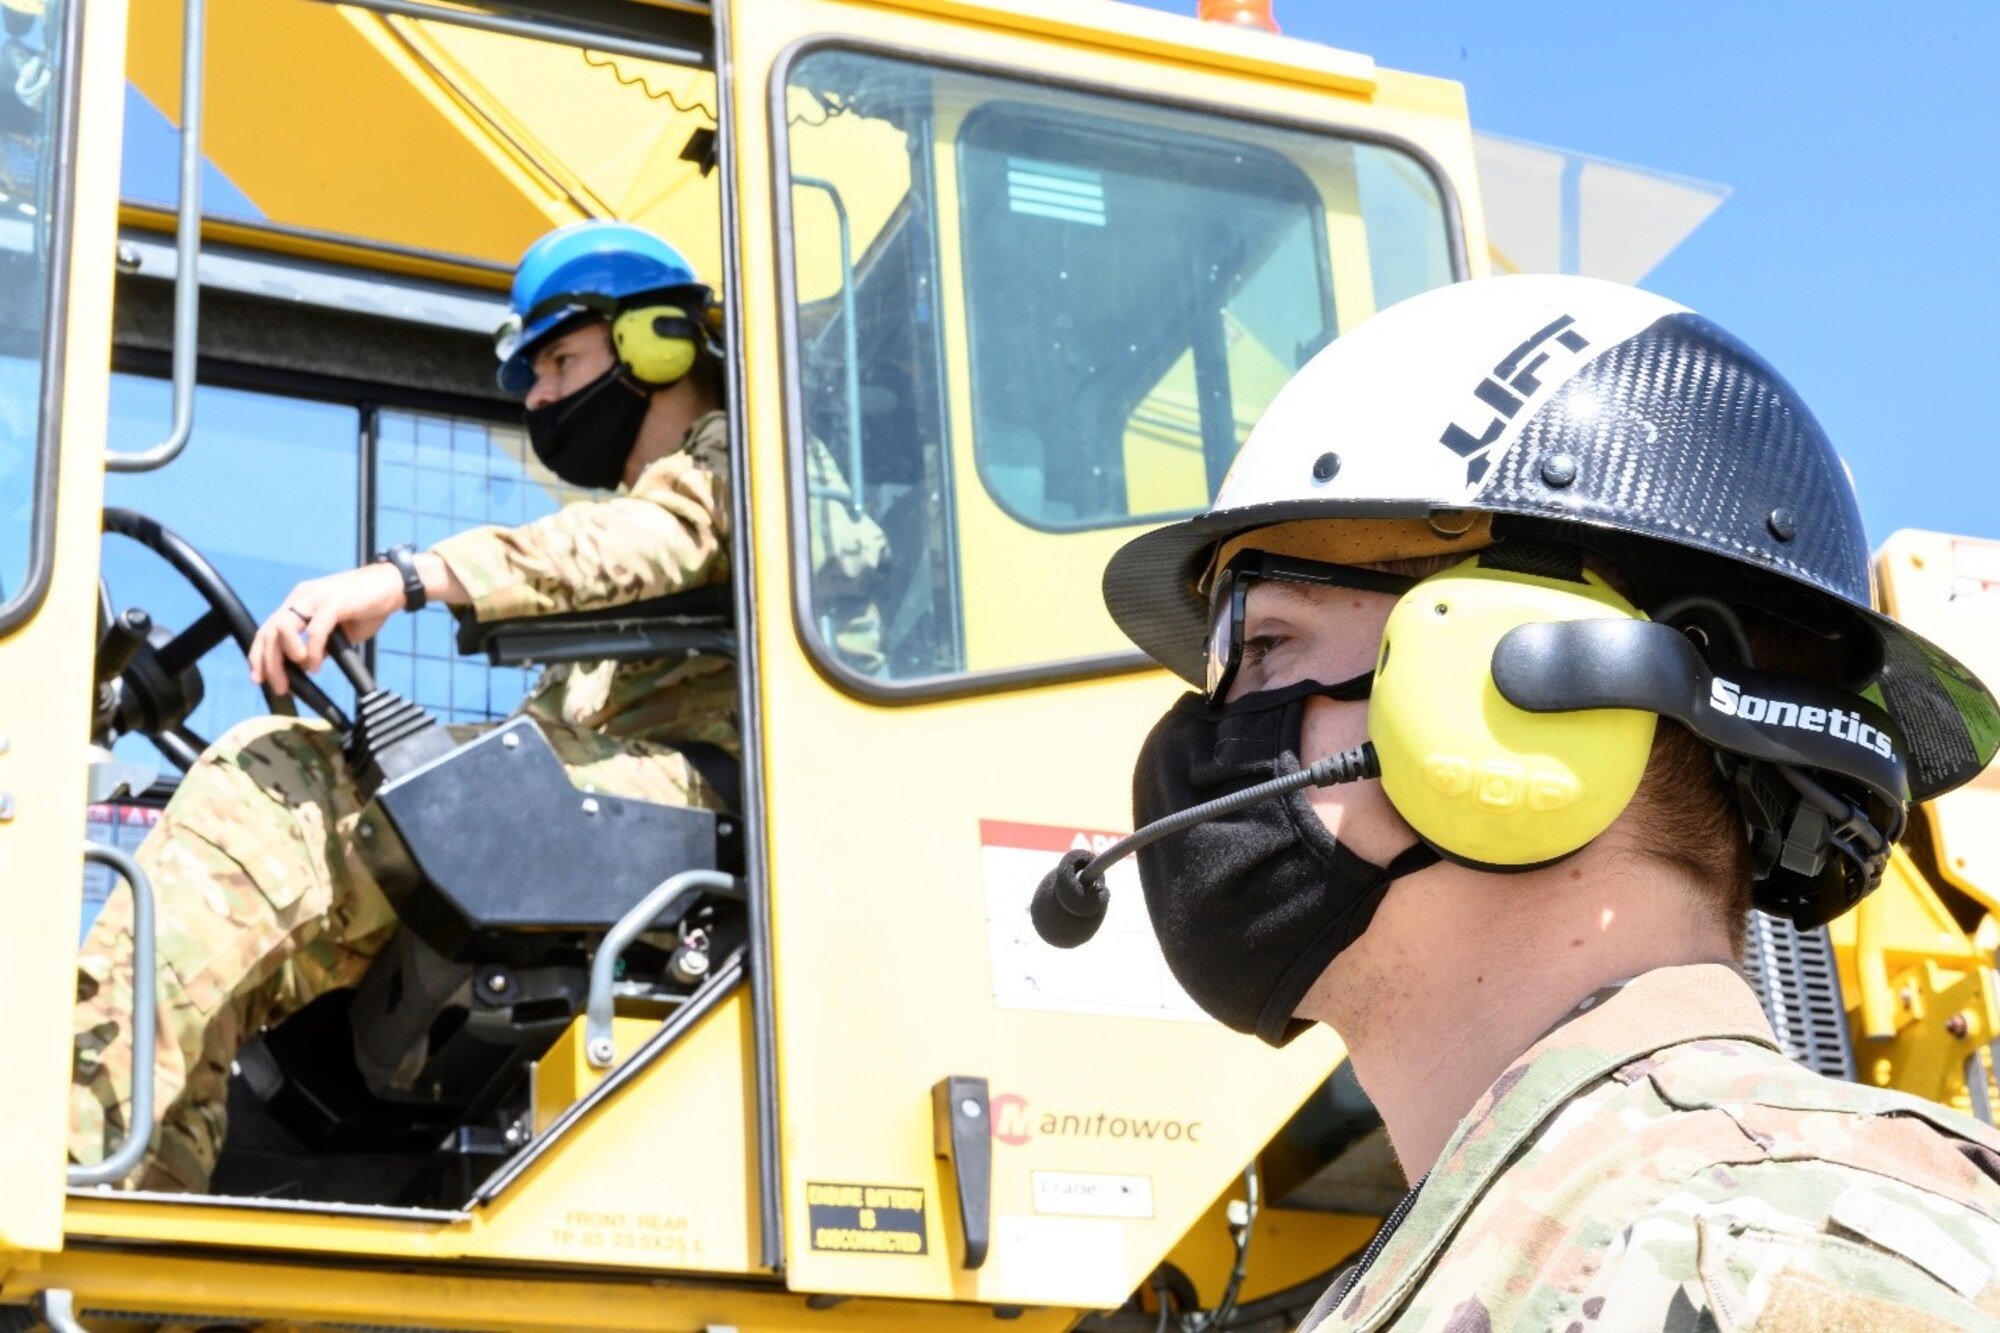 U.S. Air Force Staff Sgt. Nikolas Darragh, right, 60th Maintenance Squadron assistant noncommissioned officer in charge of wheels and tires, explains via headset the proper use of a 50-ton crane to Col. Zachery Jiron, 60th Air Mobility Wing vice commander, May 7, 2021, at Travis Air Force Base, California. Jiron visited the 60th MXS during Leadership Rounds, a program that provides 60th AMW leadership an opportunity to interact with Airmen and receive a detailed view of each mission performed at Travis AFB.